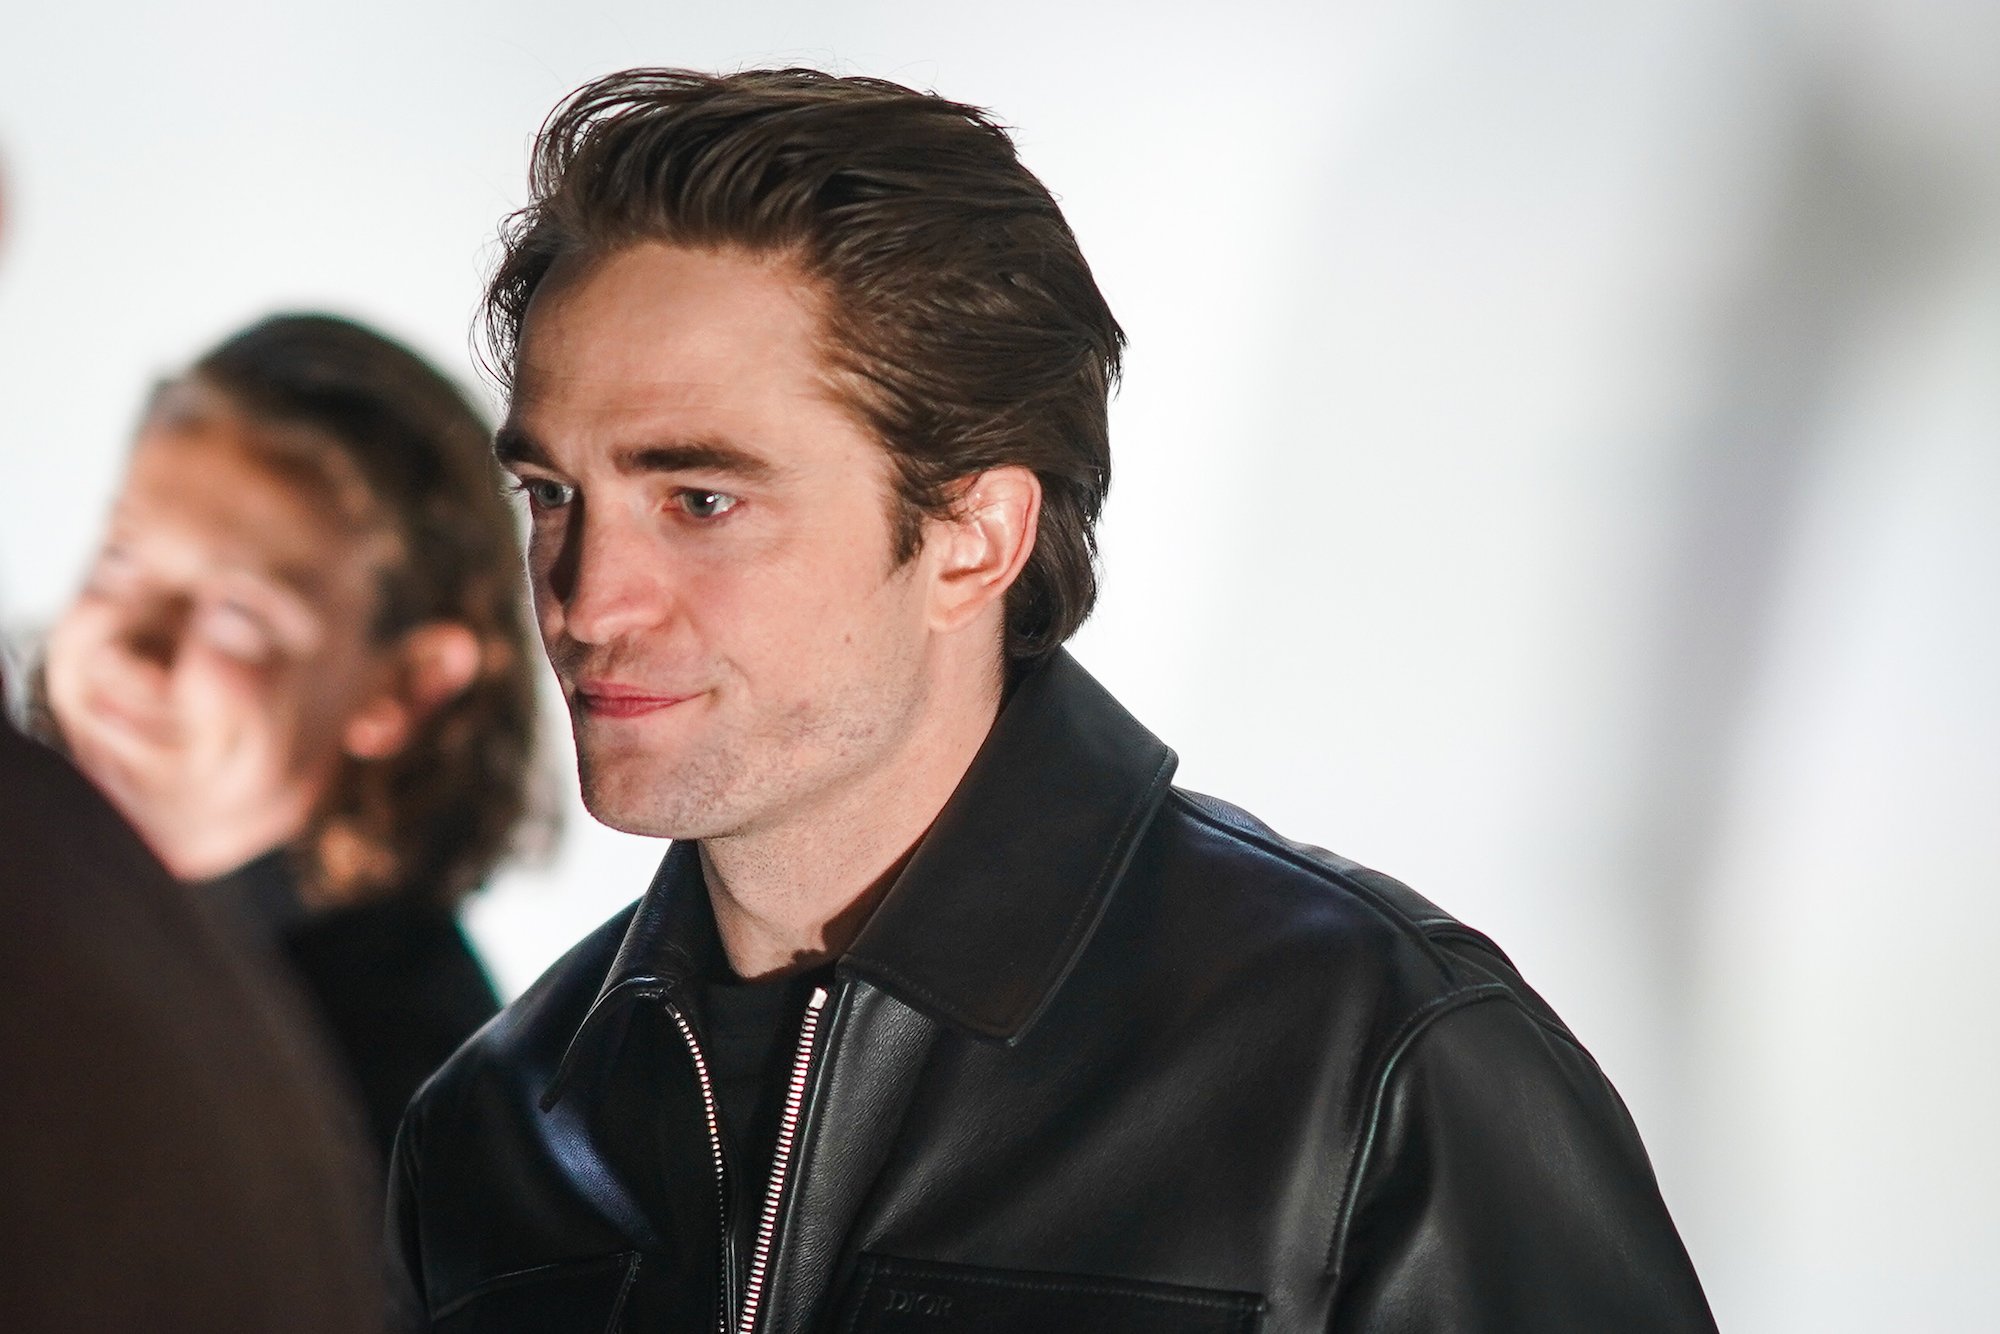 ‘Twilight’: Robert Pattinson Spoke in an American Accent to Deal with Fame